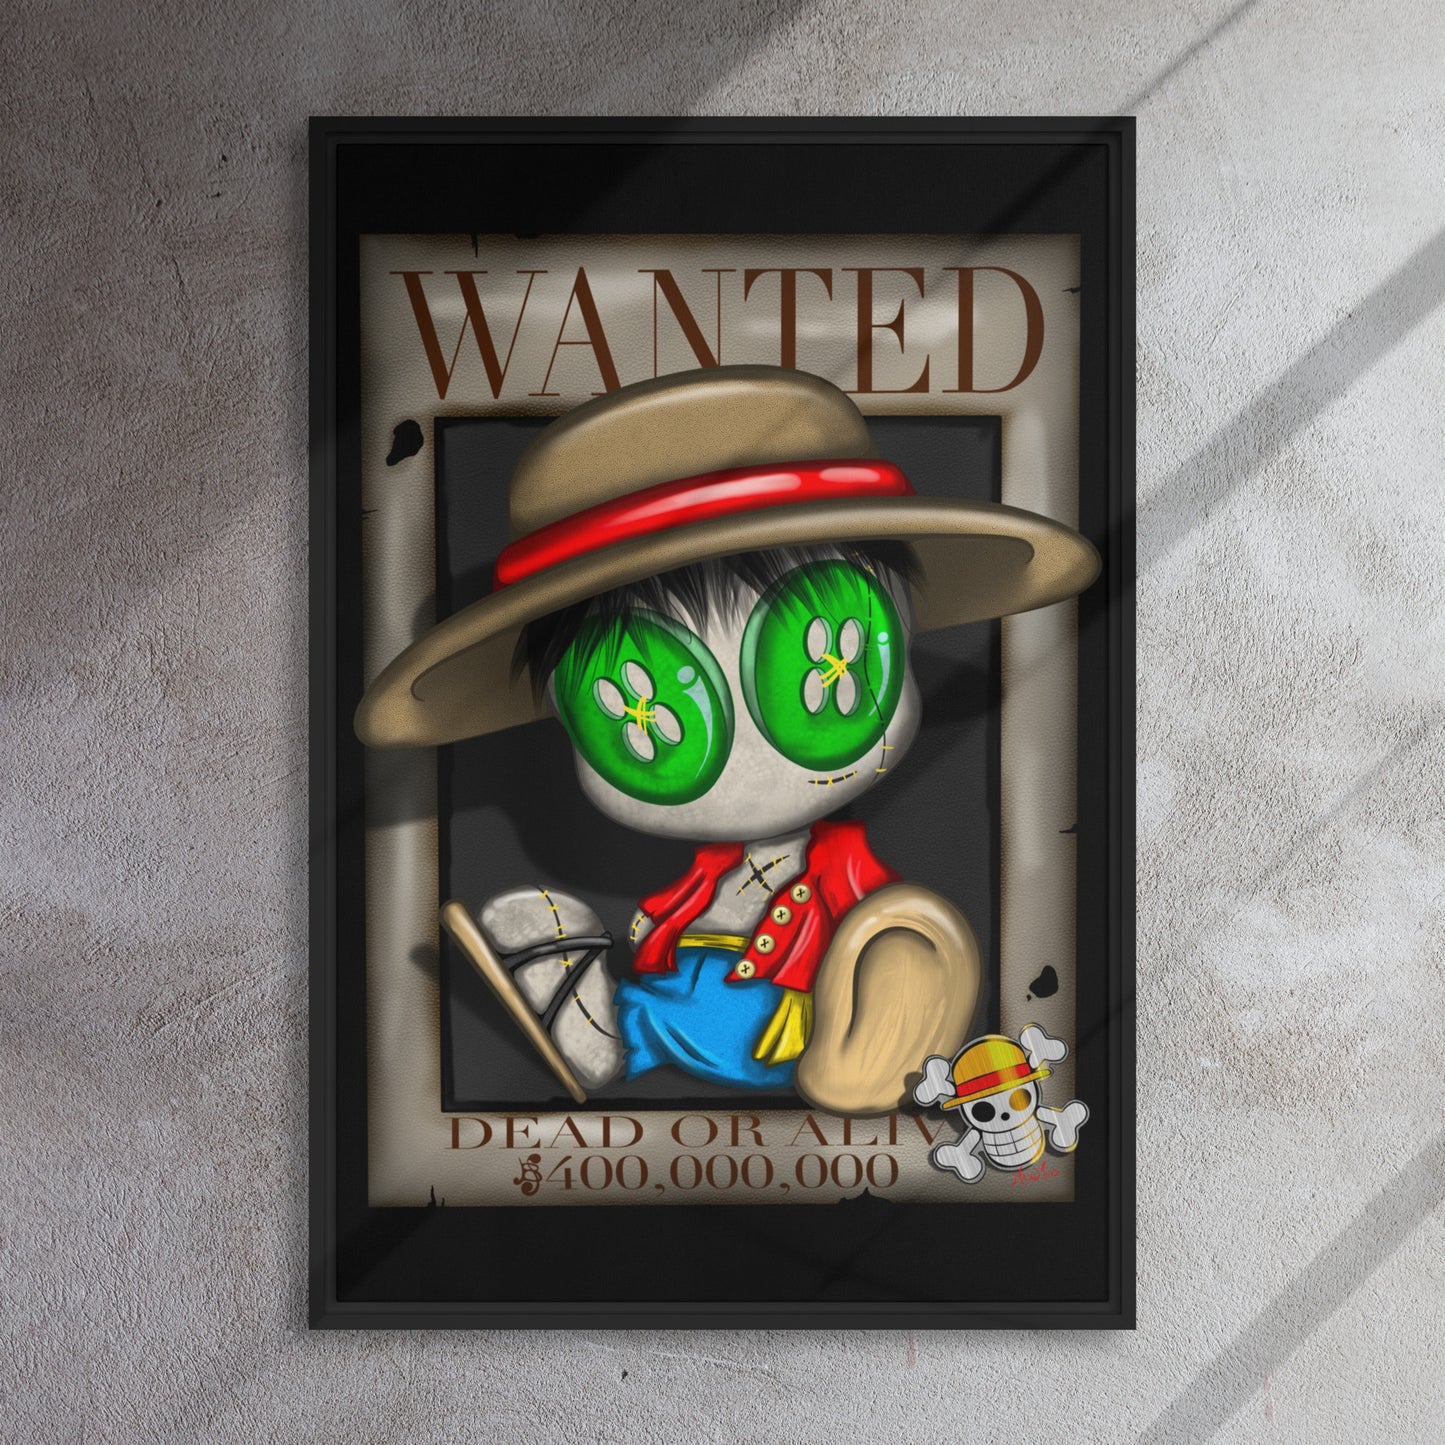 Wanted Framed canvas